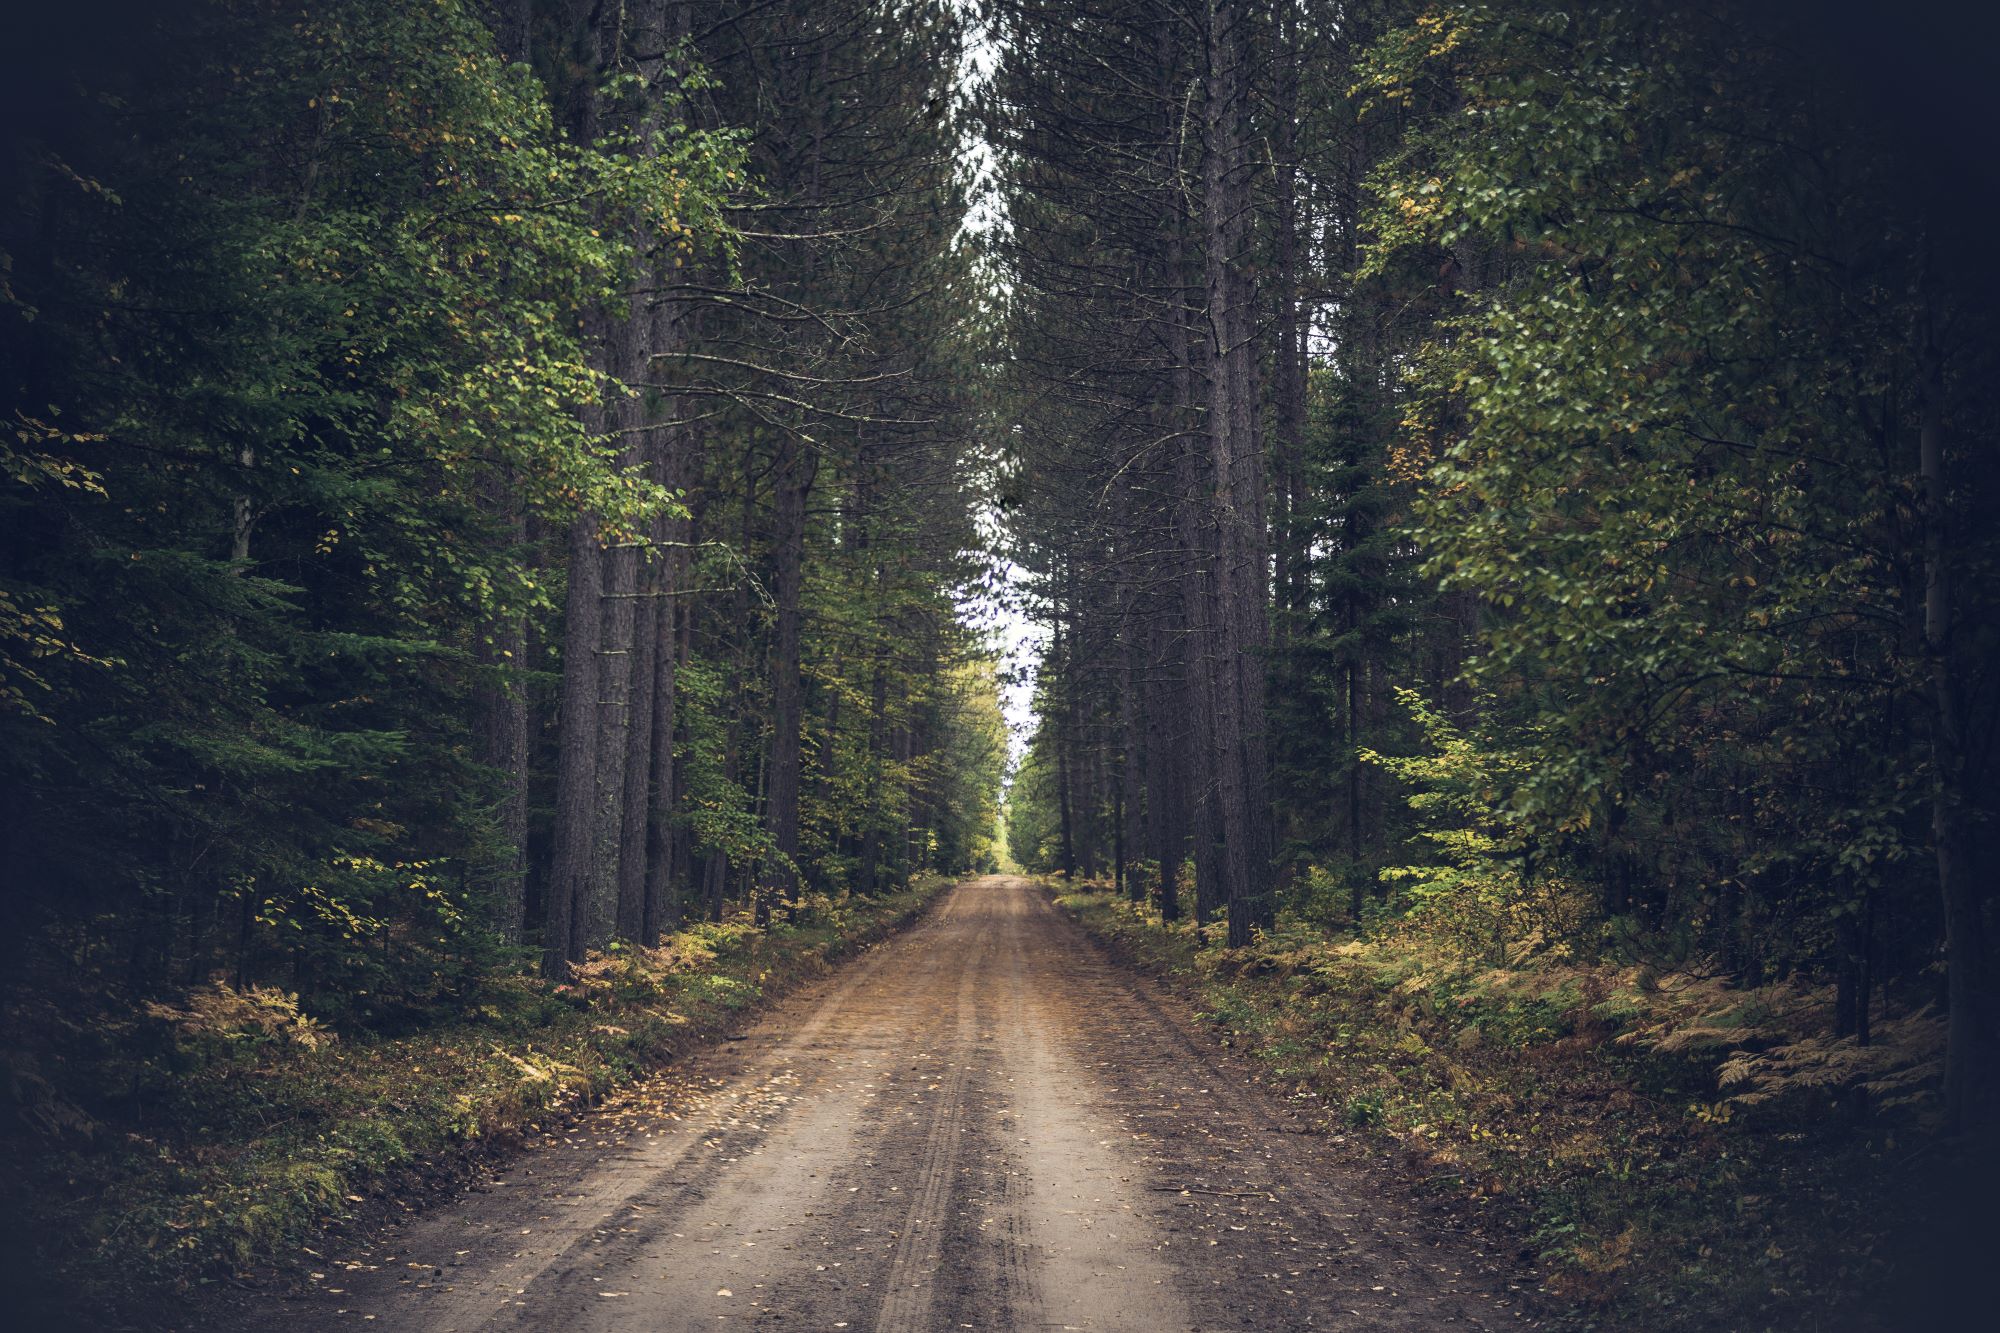 forest roads are often dirt or stone